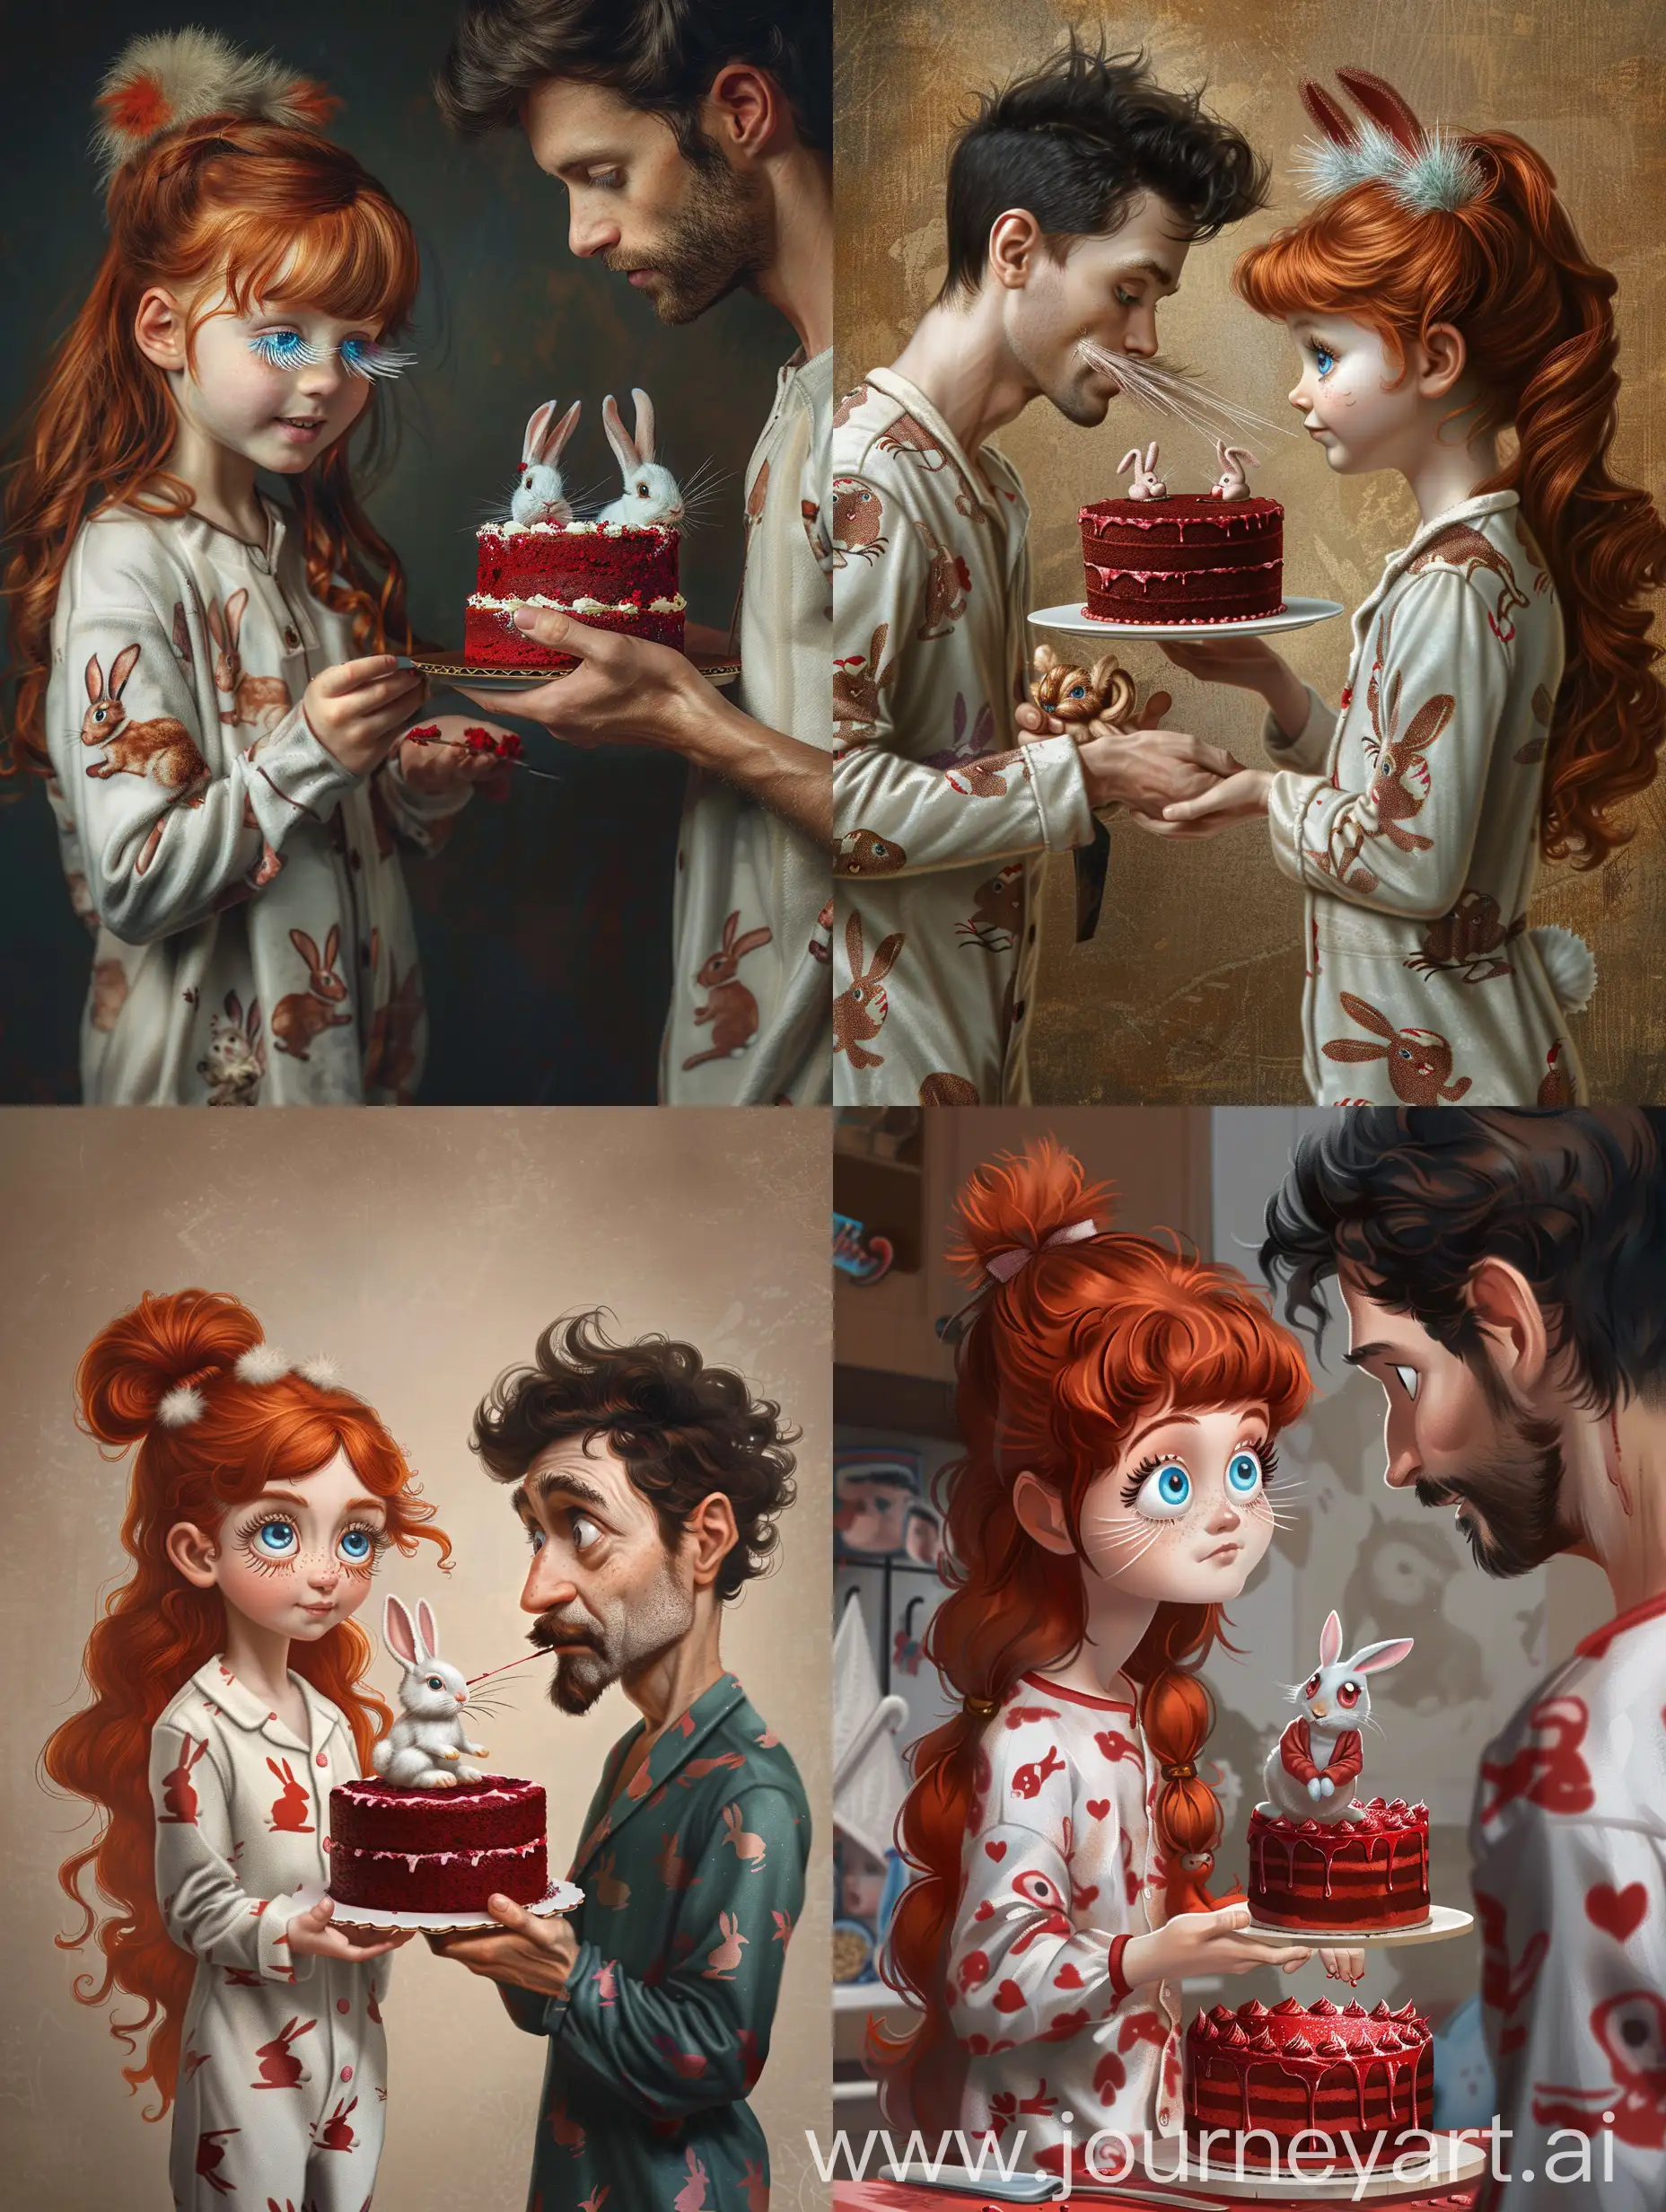 RedHaired-Girl-in-Rabbit-Pajamas-Presents-Festive-Cake-to-DarkHaired-Man